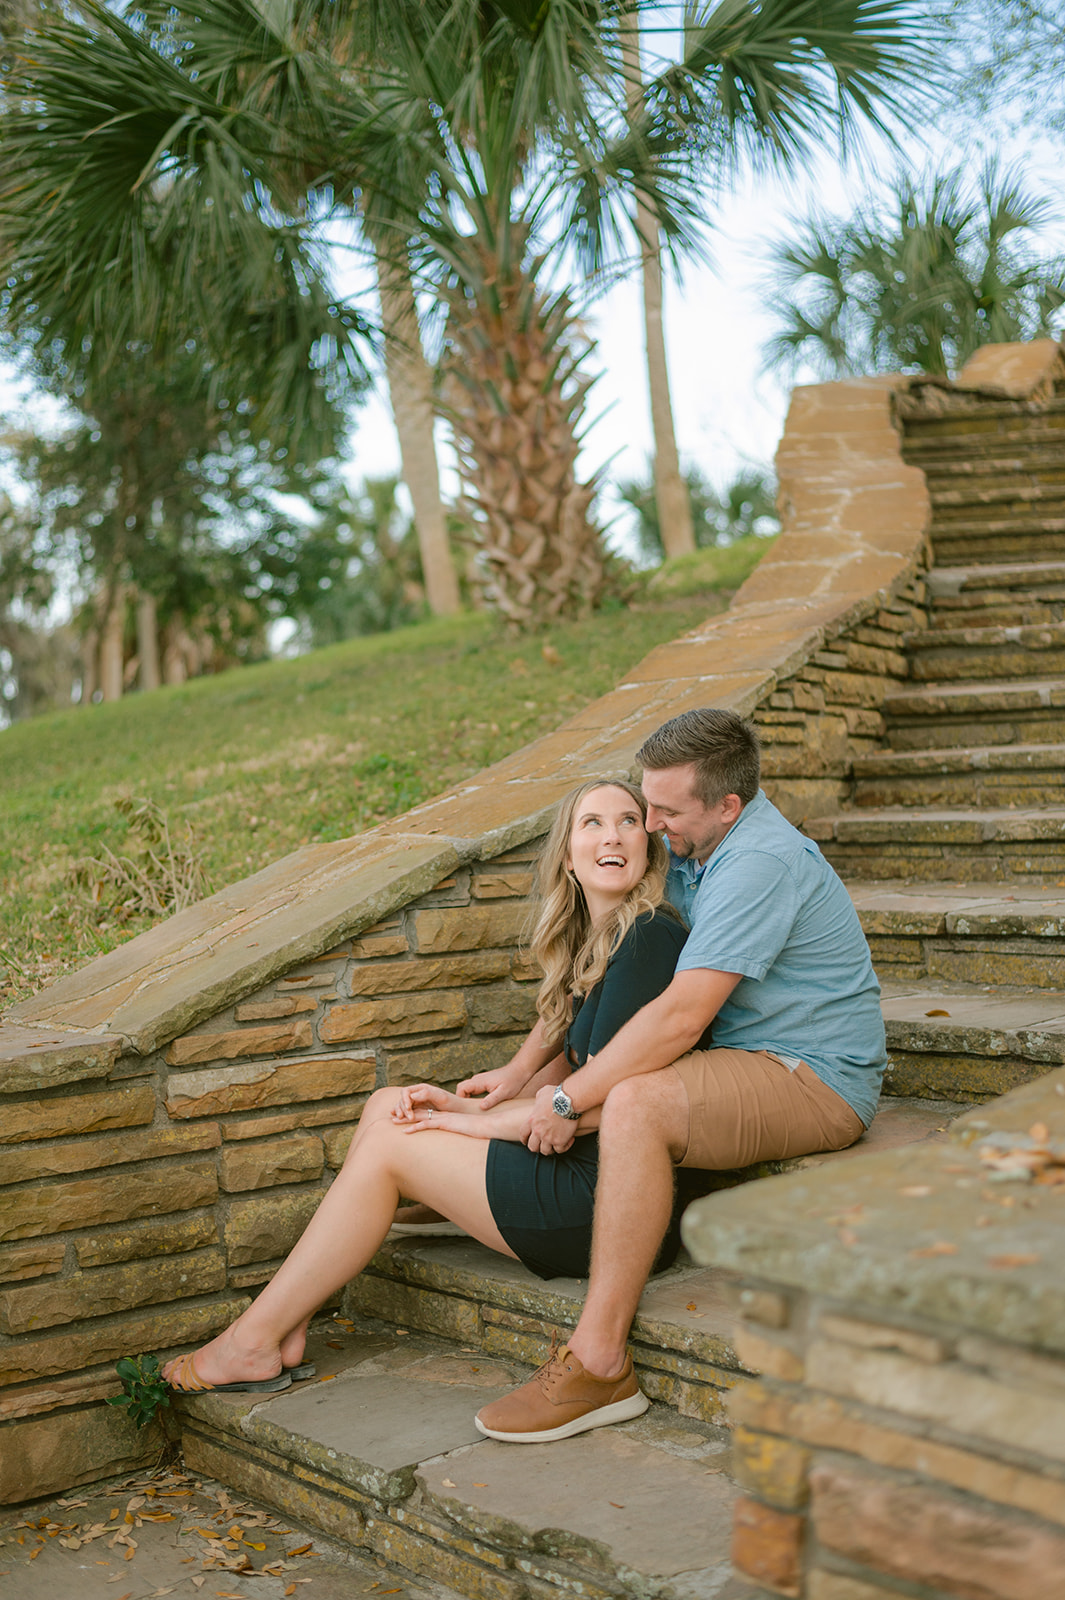 "Engagement photo with a vintage vibe at Philippe Park, Tampa"
